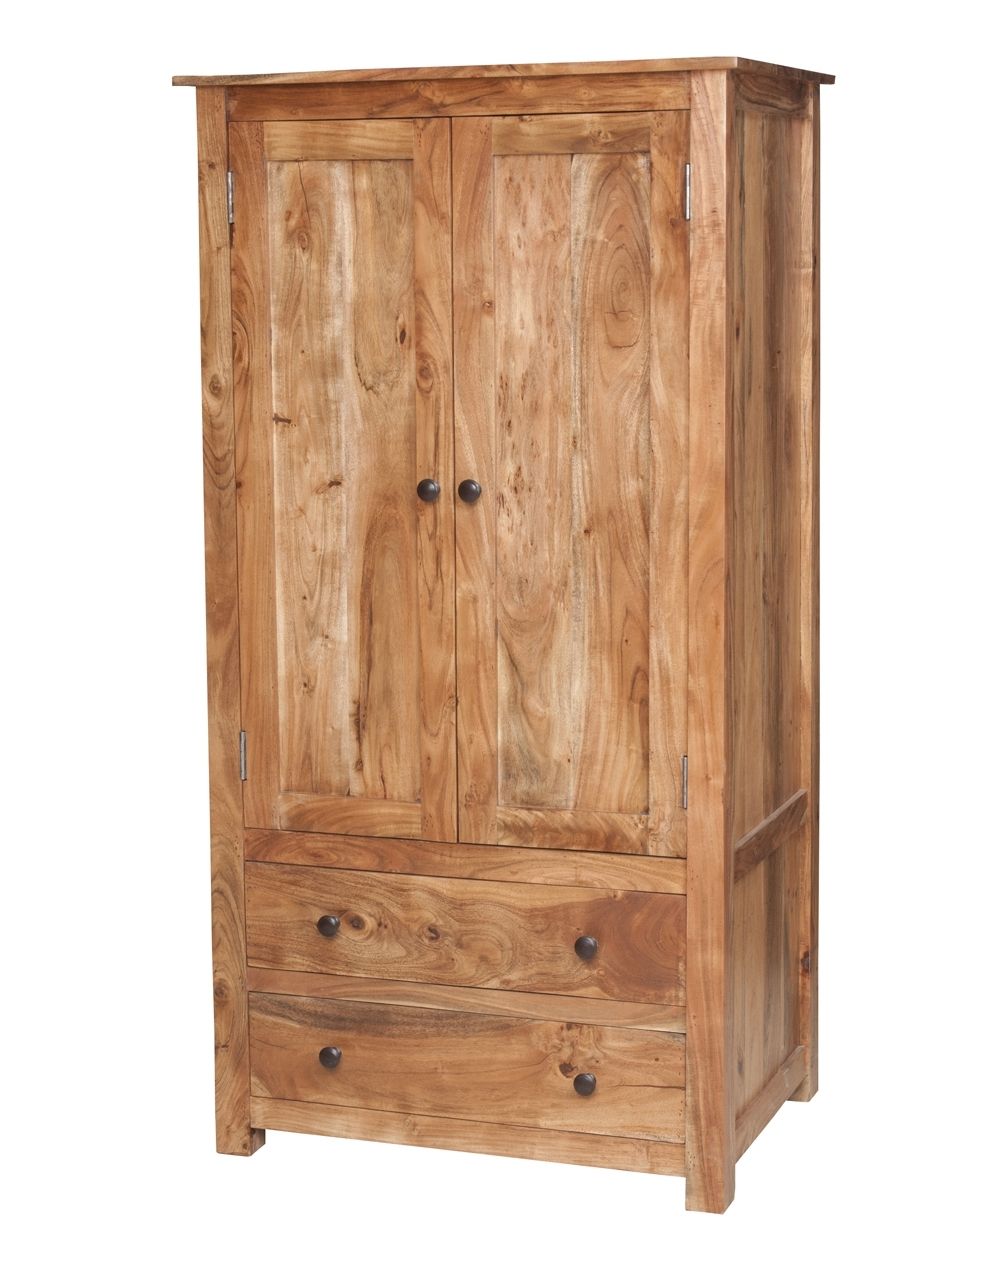 Buy Solid Wooden Wardrobes Online In India  Fabindia With Regard To Well Known Wooden Wardrobes (View 5 of 15)